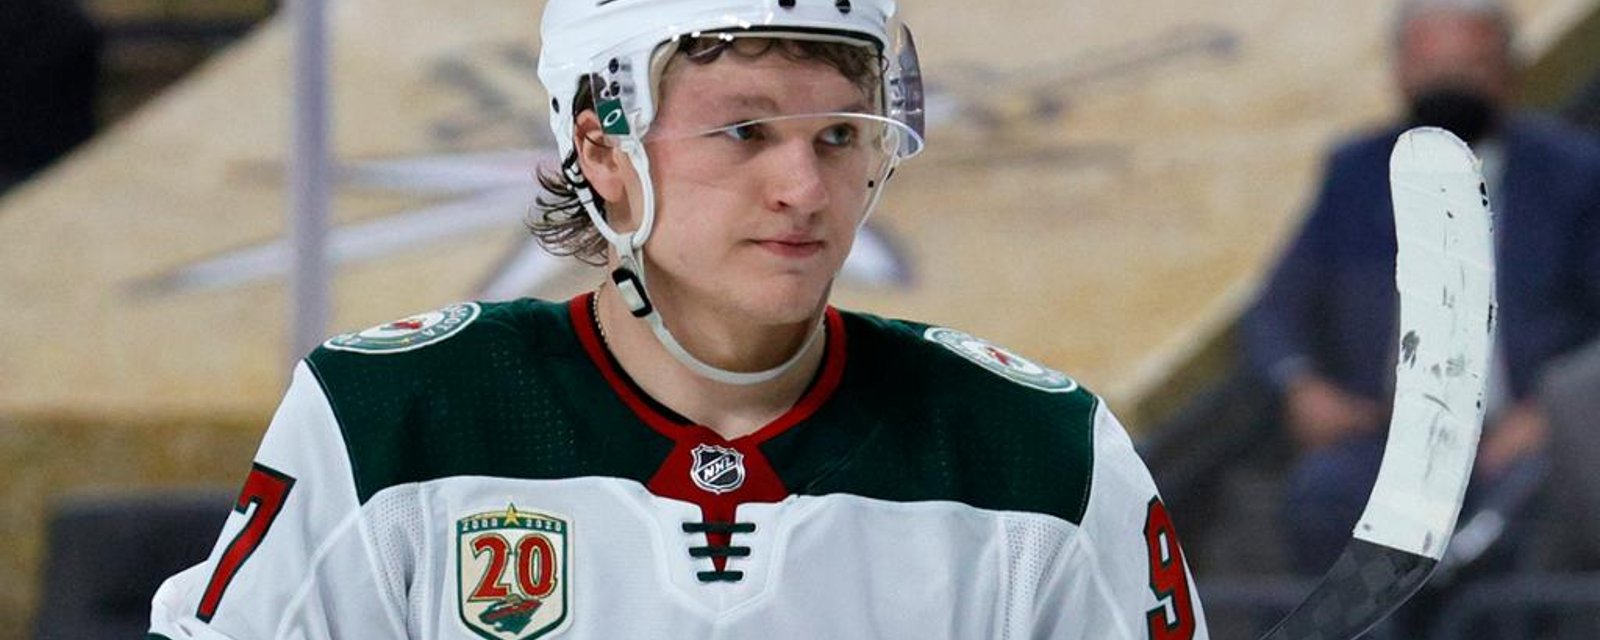 Top rookie Kaprizov rumoured to consider leaving the NHL! 